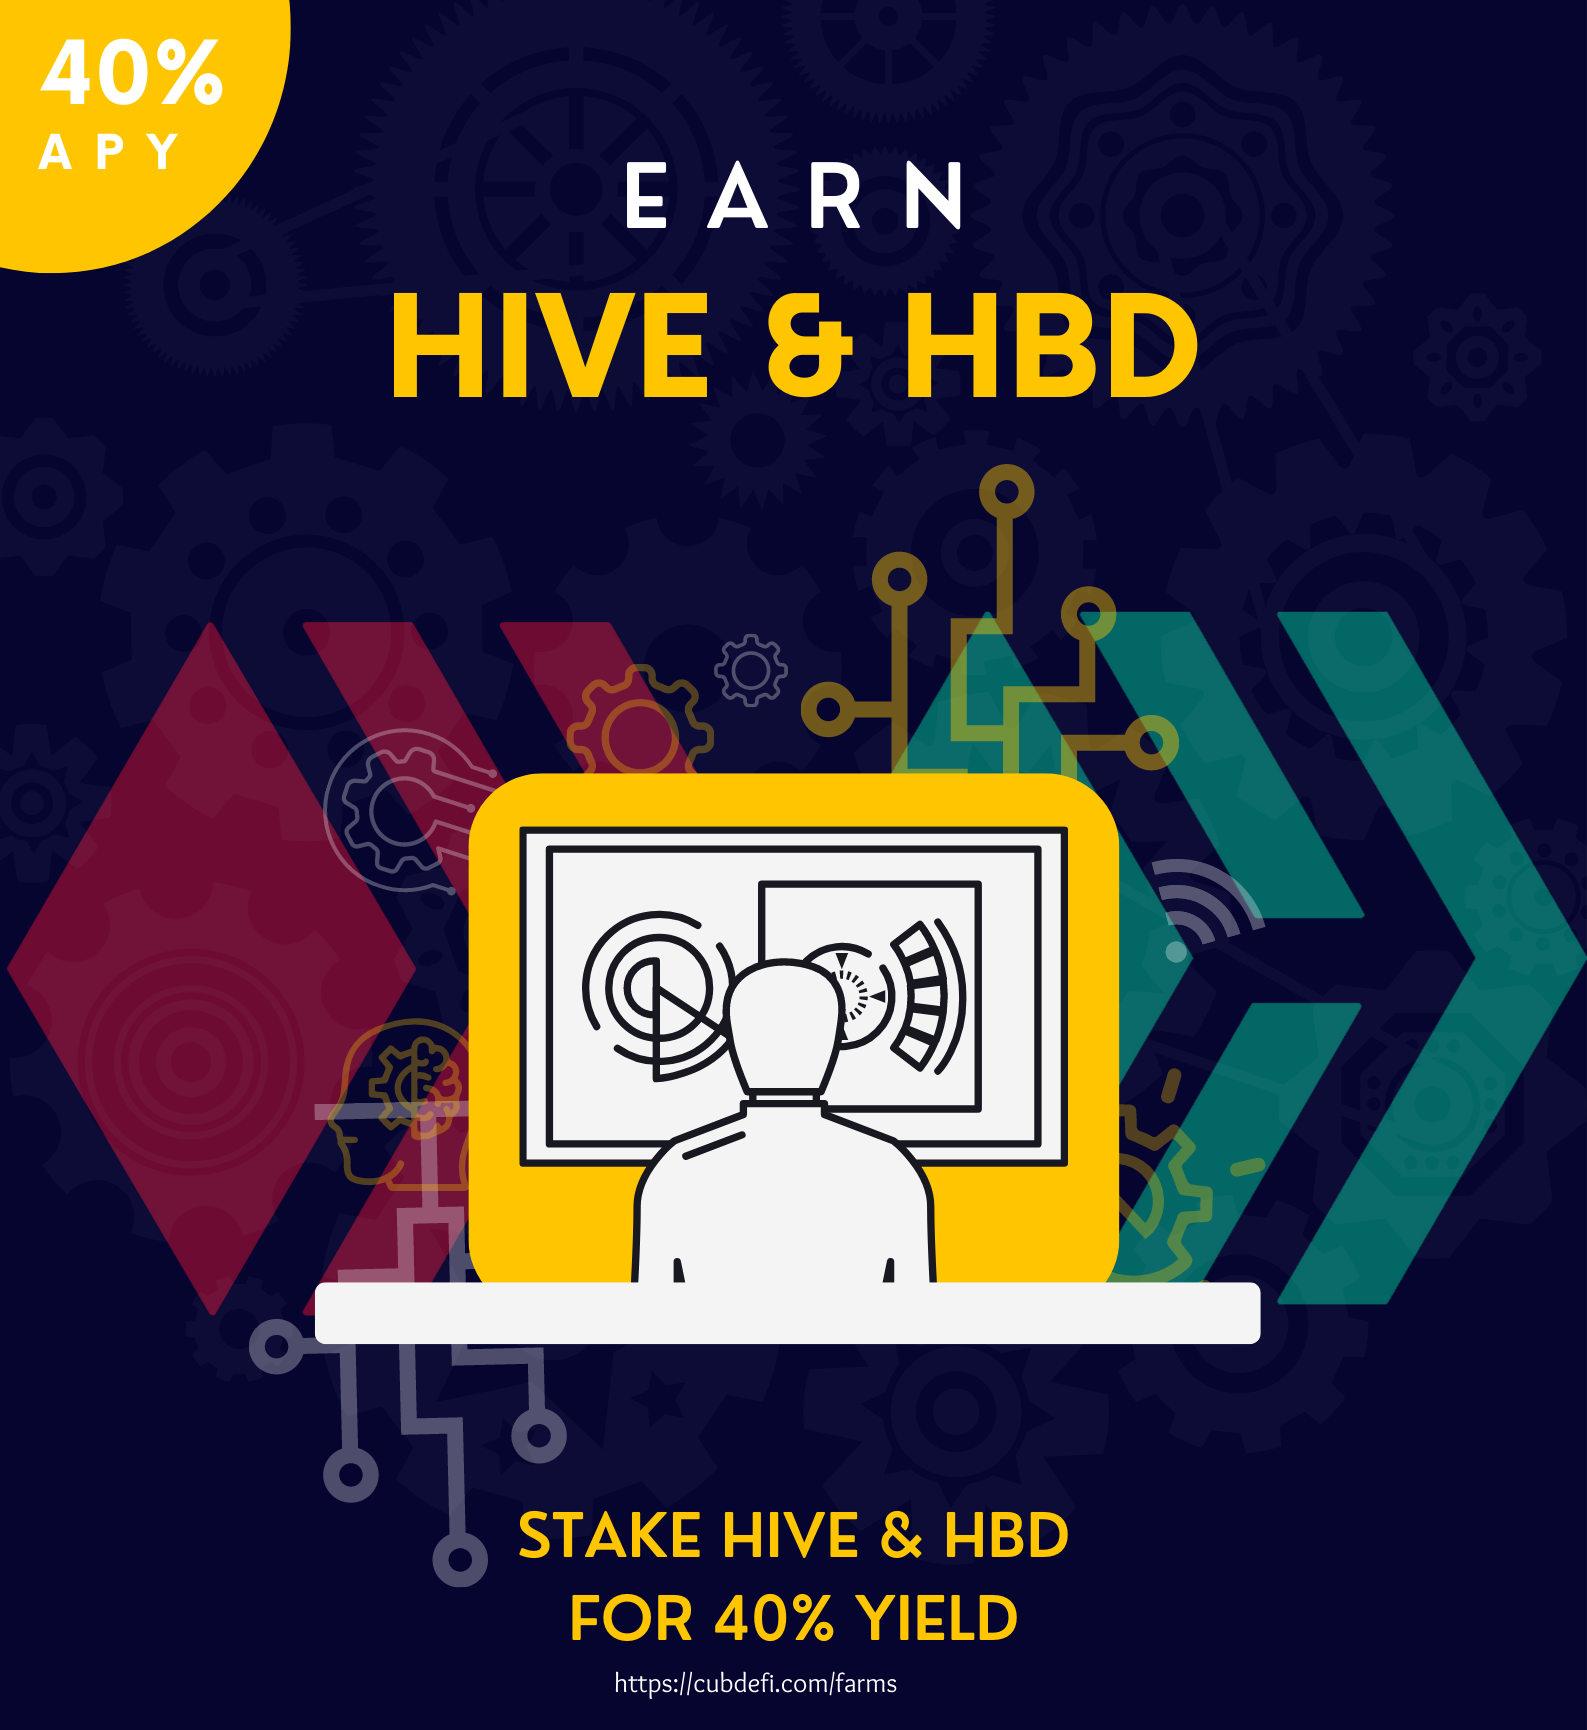 @leofinance/the-best-way-to-earn-more-hive-and-hbd-or-earn-40-apy-and-get-more-hive